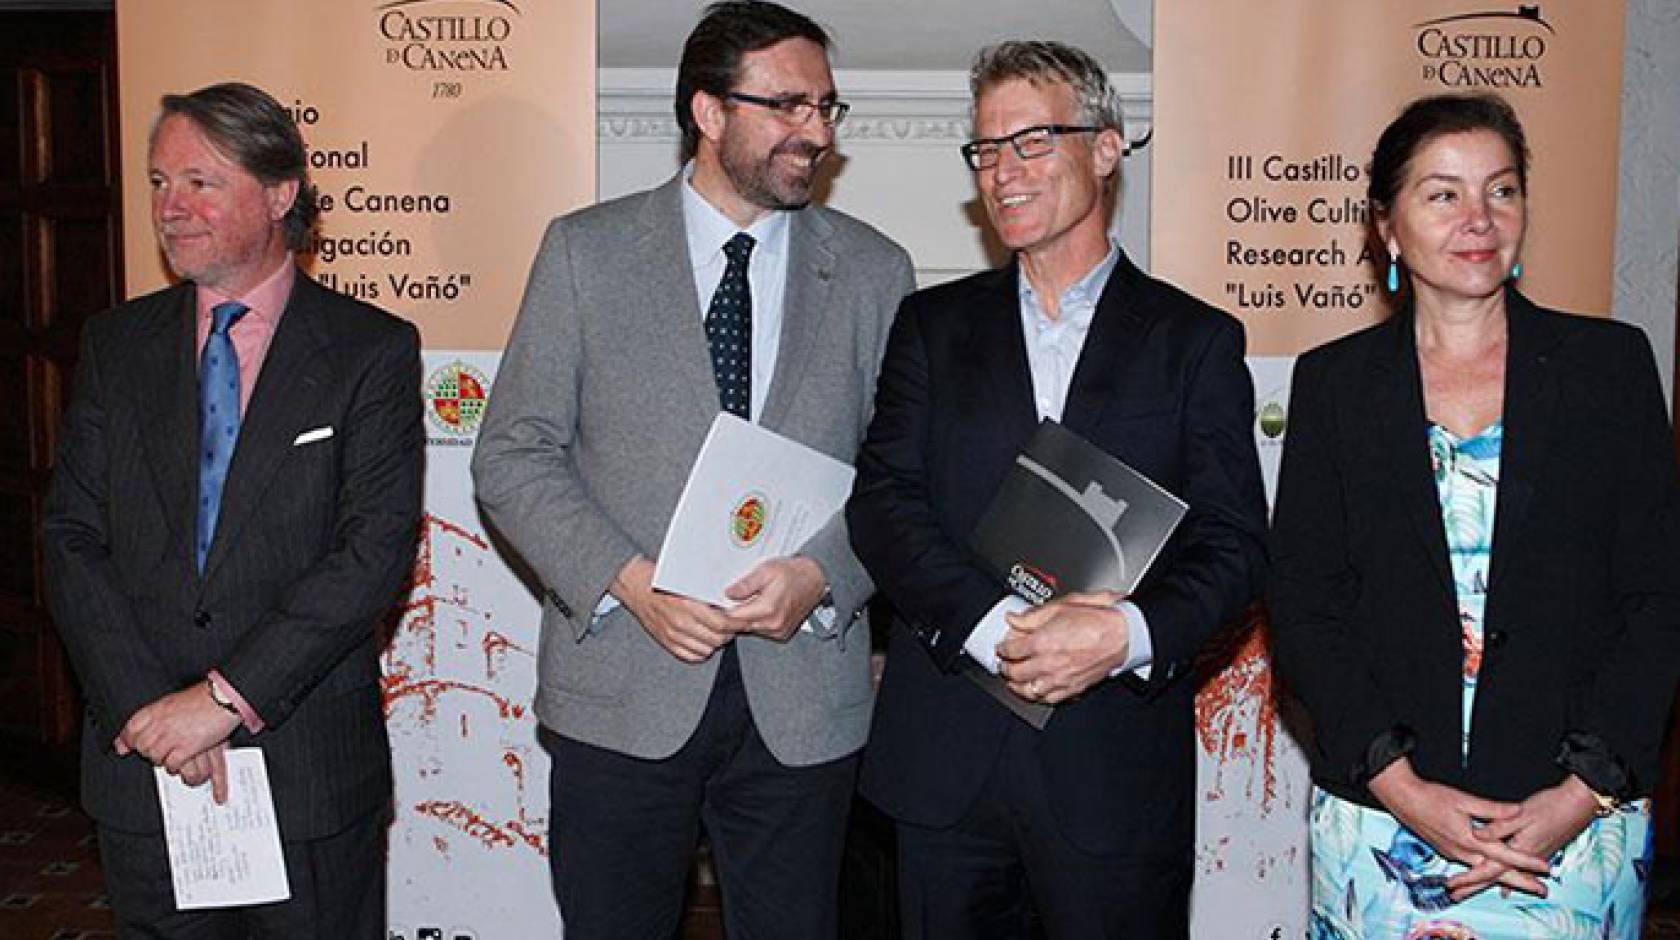 The UC Davis Olive Center’s Dan Flynn, second from right, stands alongside Juan Gómez, rector of the University of Jaén, during the award ceremony in Castillo de Canena, the castle after which the olive oil company is named. Also pictured are company owne